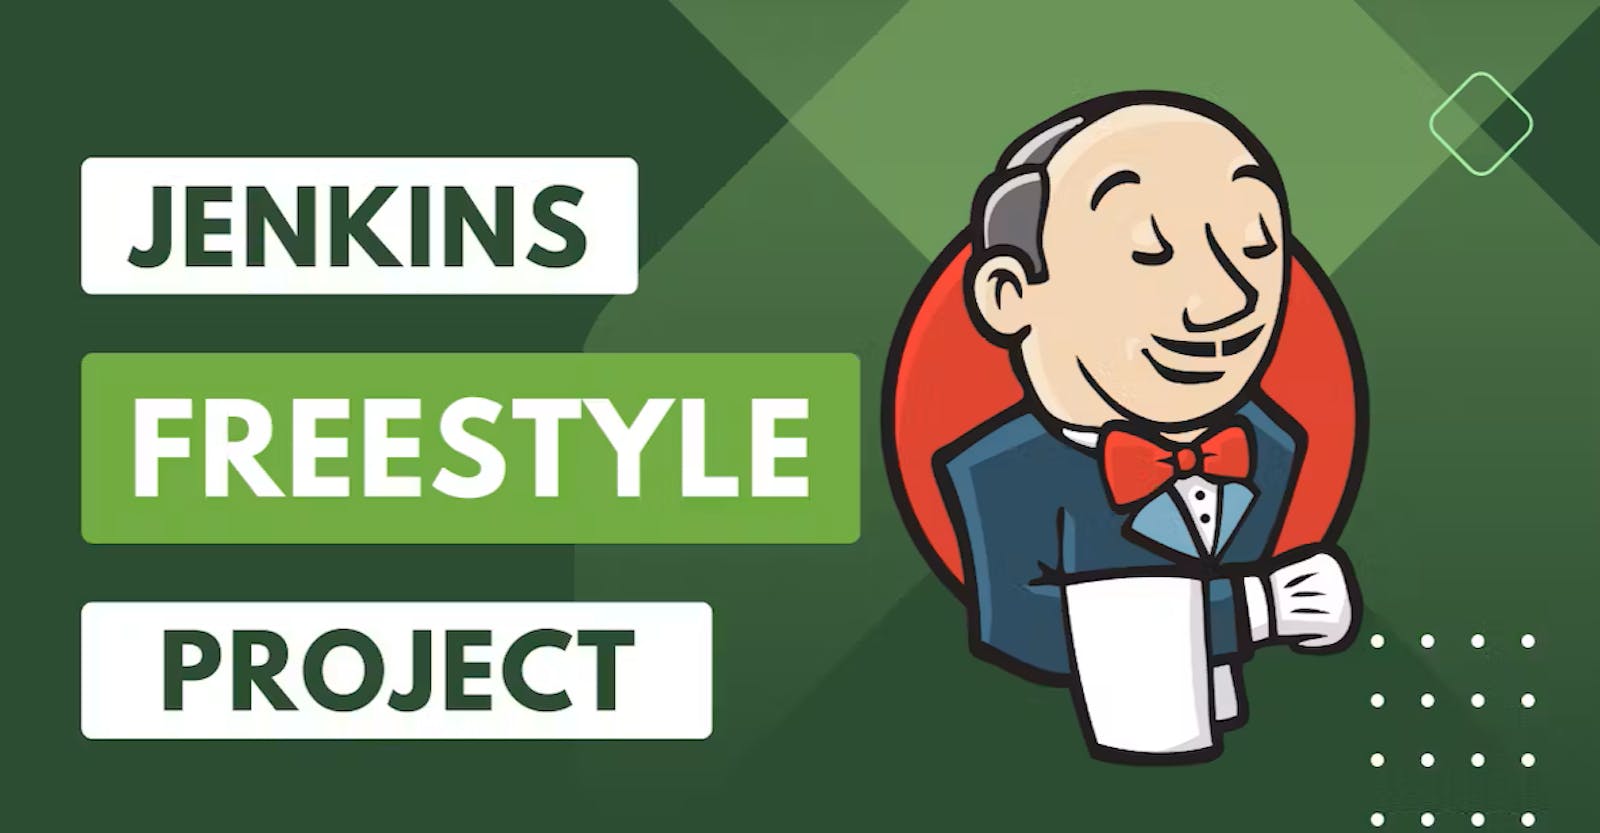 📂Day 23 - Jenkins Freestyle Project.